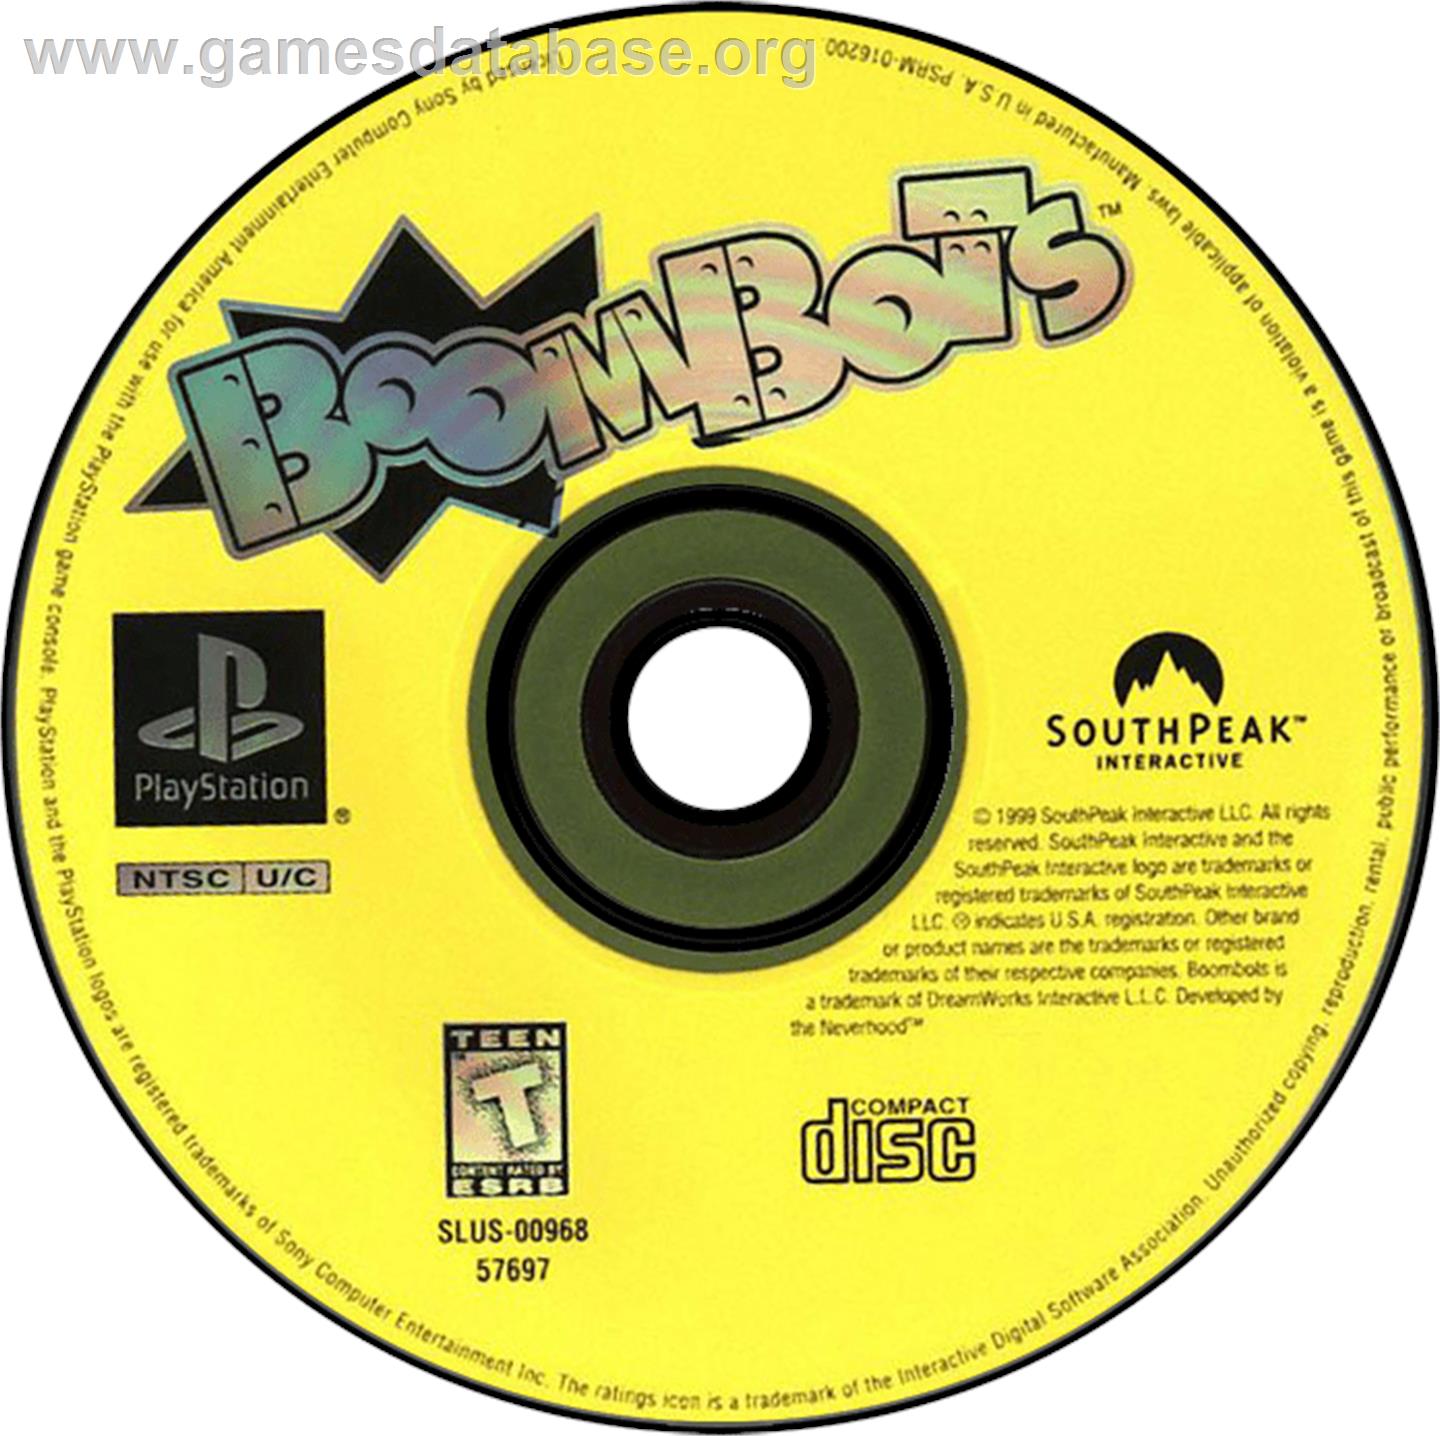 BoomBots - Sony Playstation - Artwork - Disc